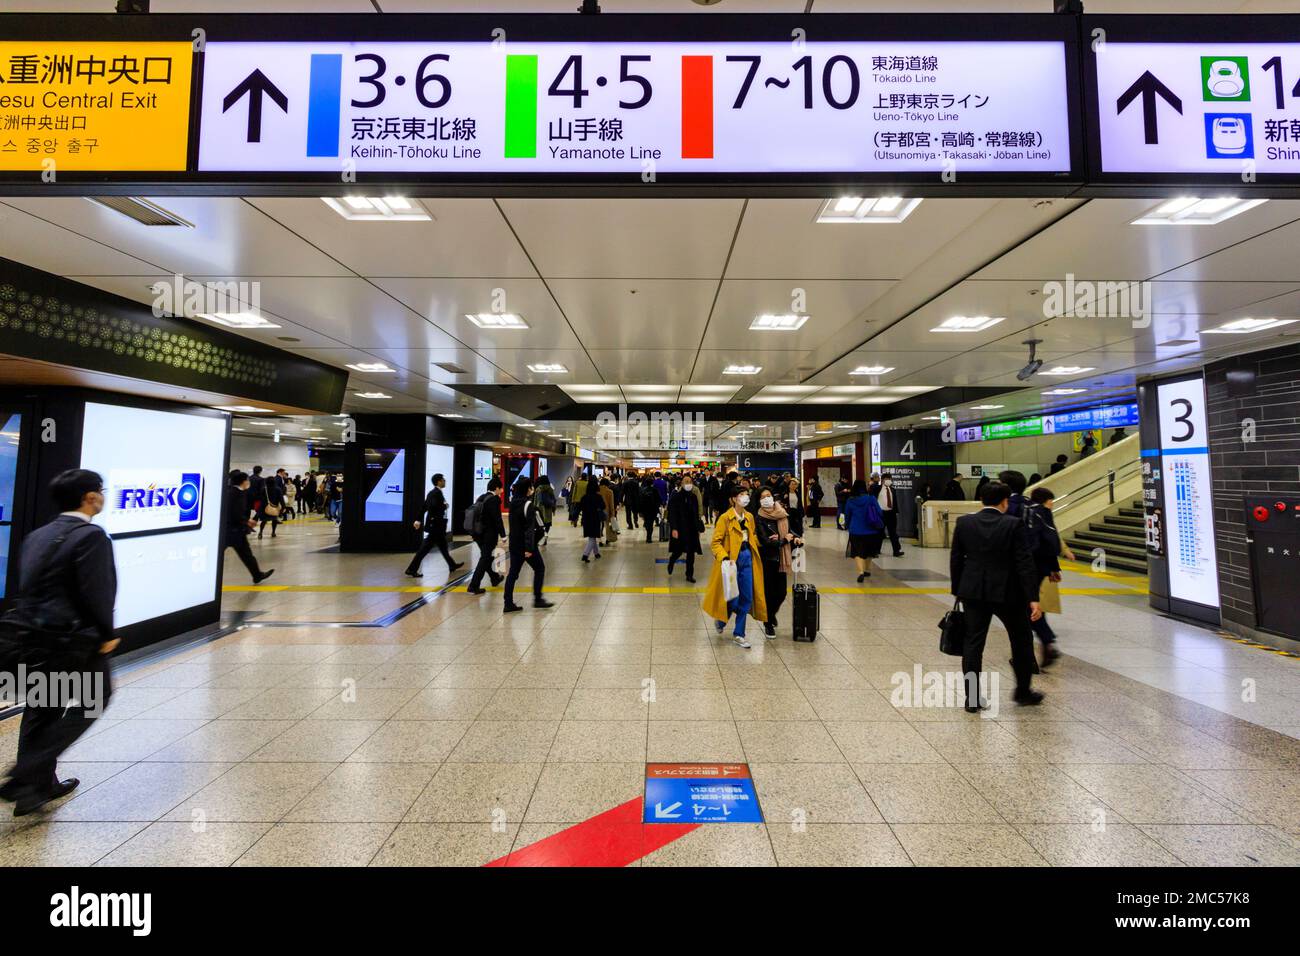 Tokyo station interior, concourse with overhead sign for the central exit, and platforms 3-10 for the Keihin-Tohoku and the Yamanote (loop) line. Stock Photo